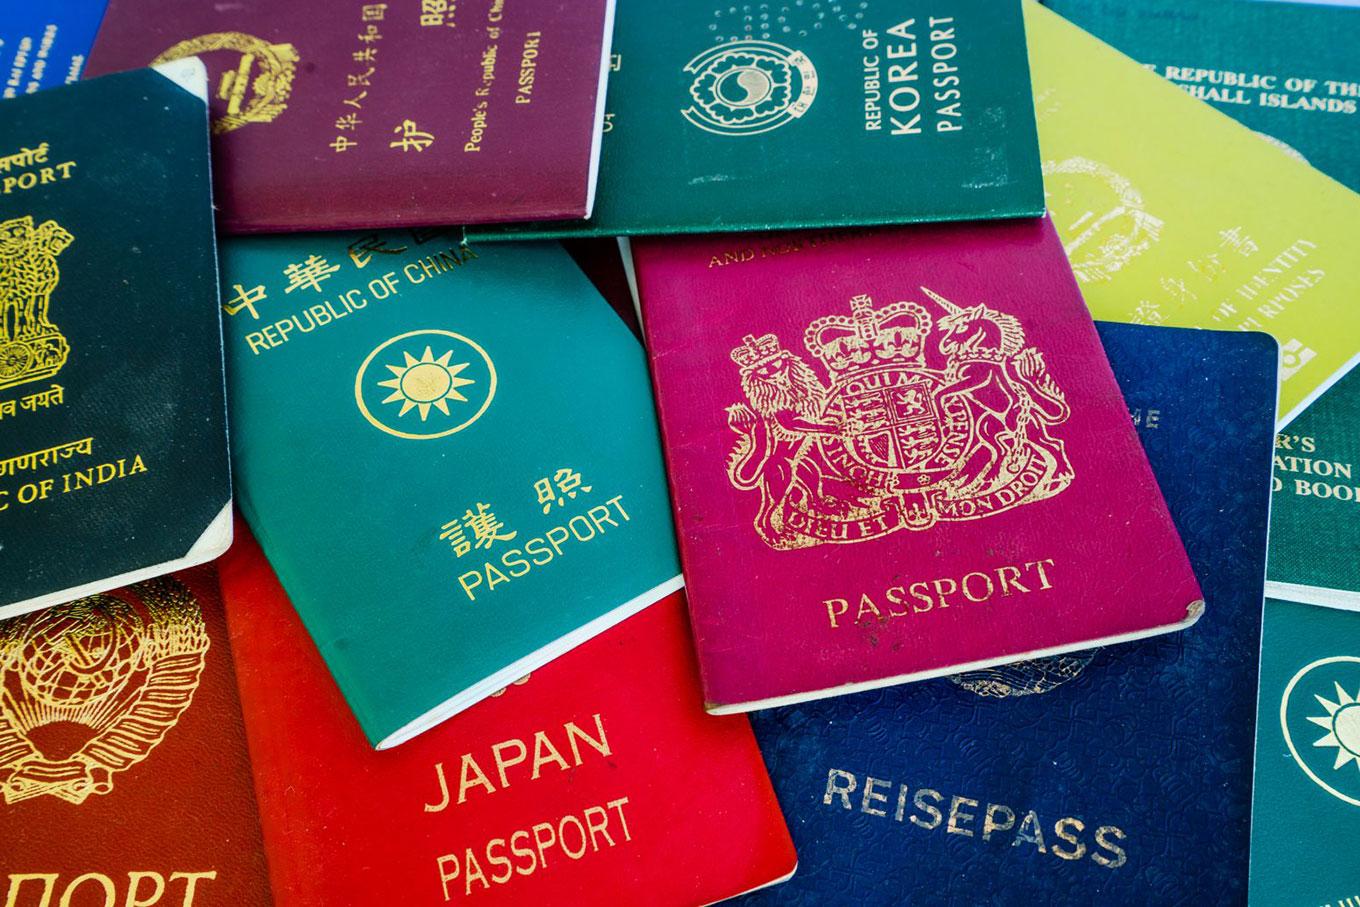 There is no shortage of rich Chinese citizens picking up second passports to make travel easier and establish a safe haven for their families, particularly in the U.S., Australia, Britain and Canada.